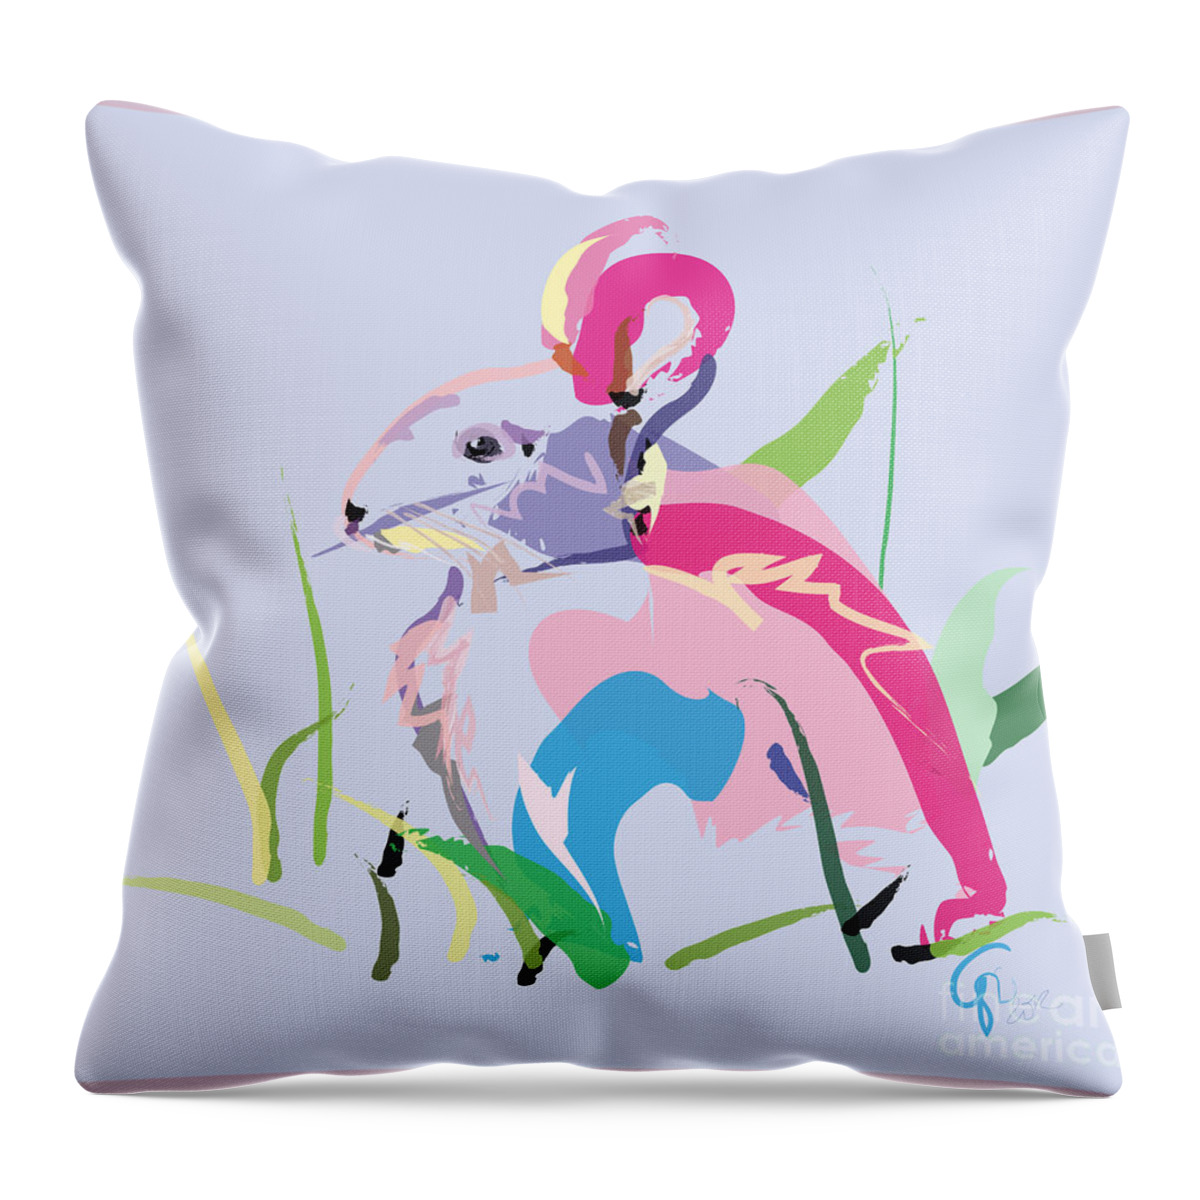 Pet Throw Pillow featuring the painting Rabbit - Bunny In Color by Go Van Kampen